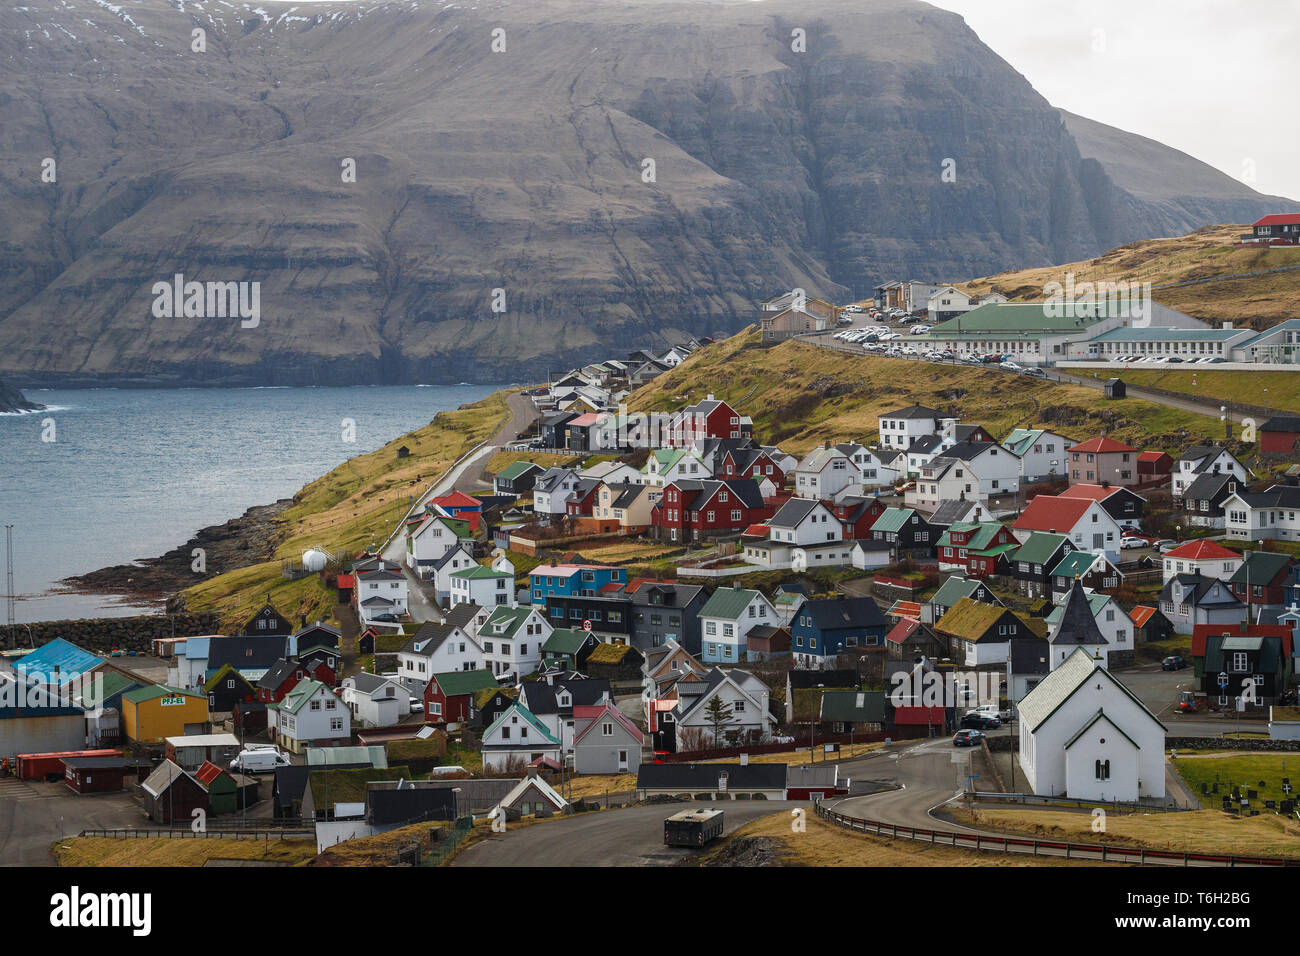 View onto the village Eiði with its colourful houses and the church of Eiði in front of a scenic mountain range (Faroe Islands, Denmark, Europe) Stock Photo